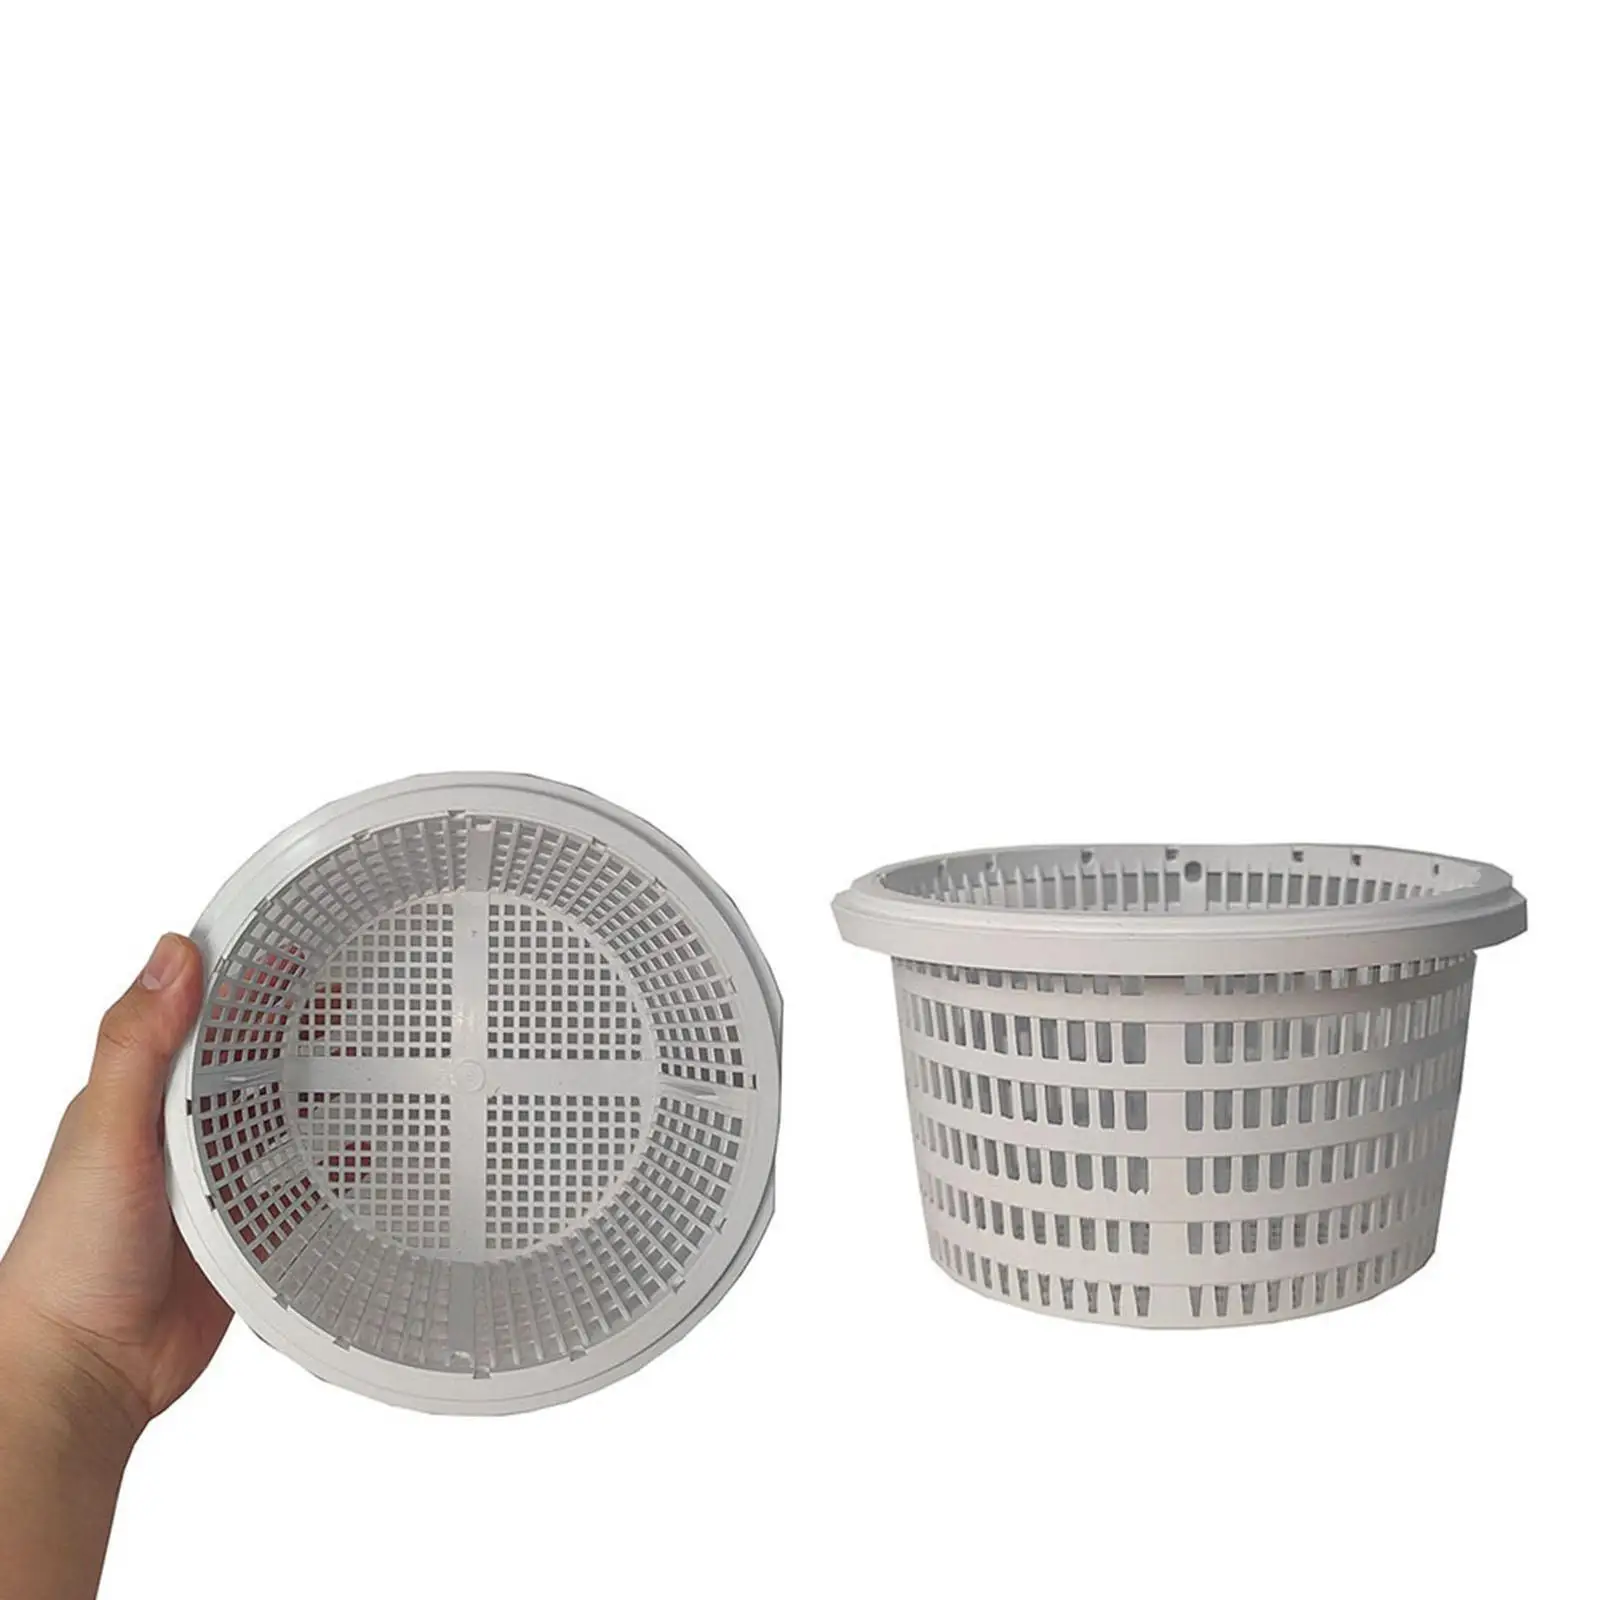 

2/3/5 Strainer Pool Filter Basket Replacement Skimmer Basket for Cleaning Grass